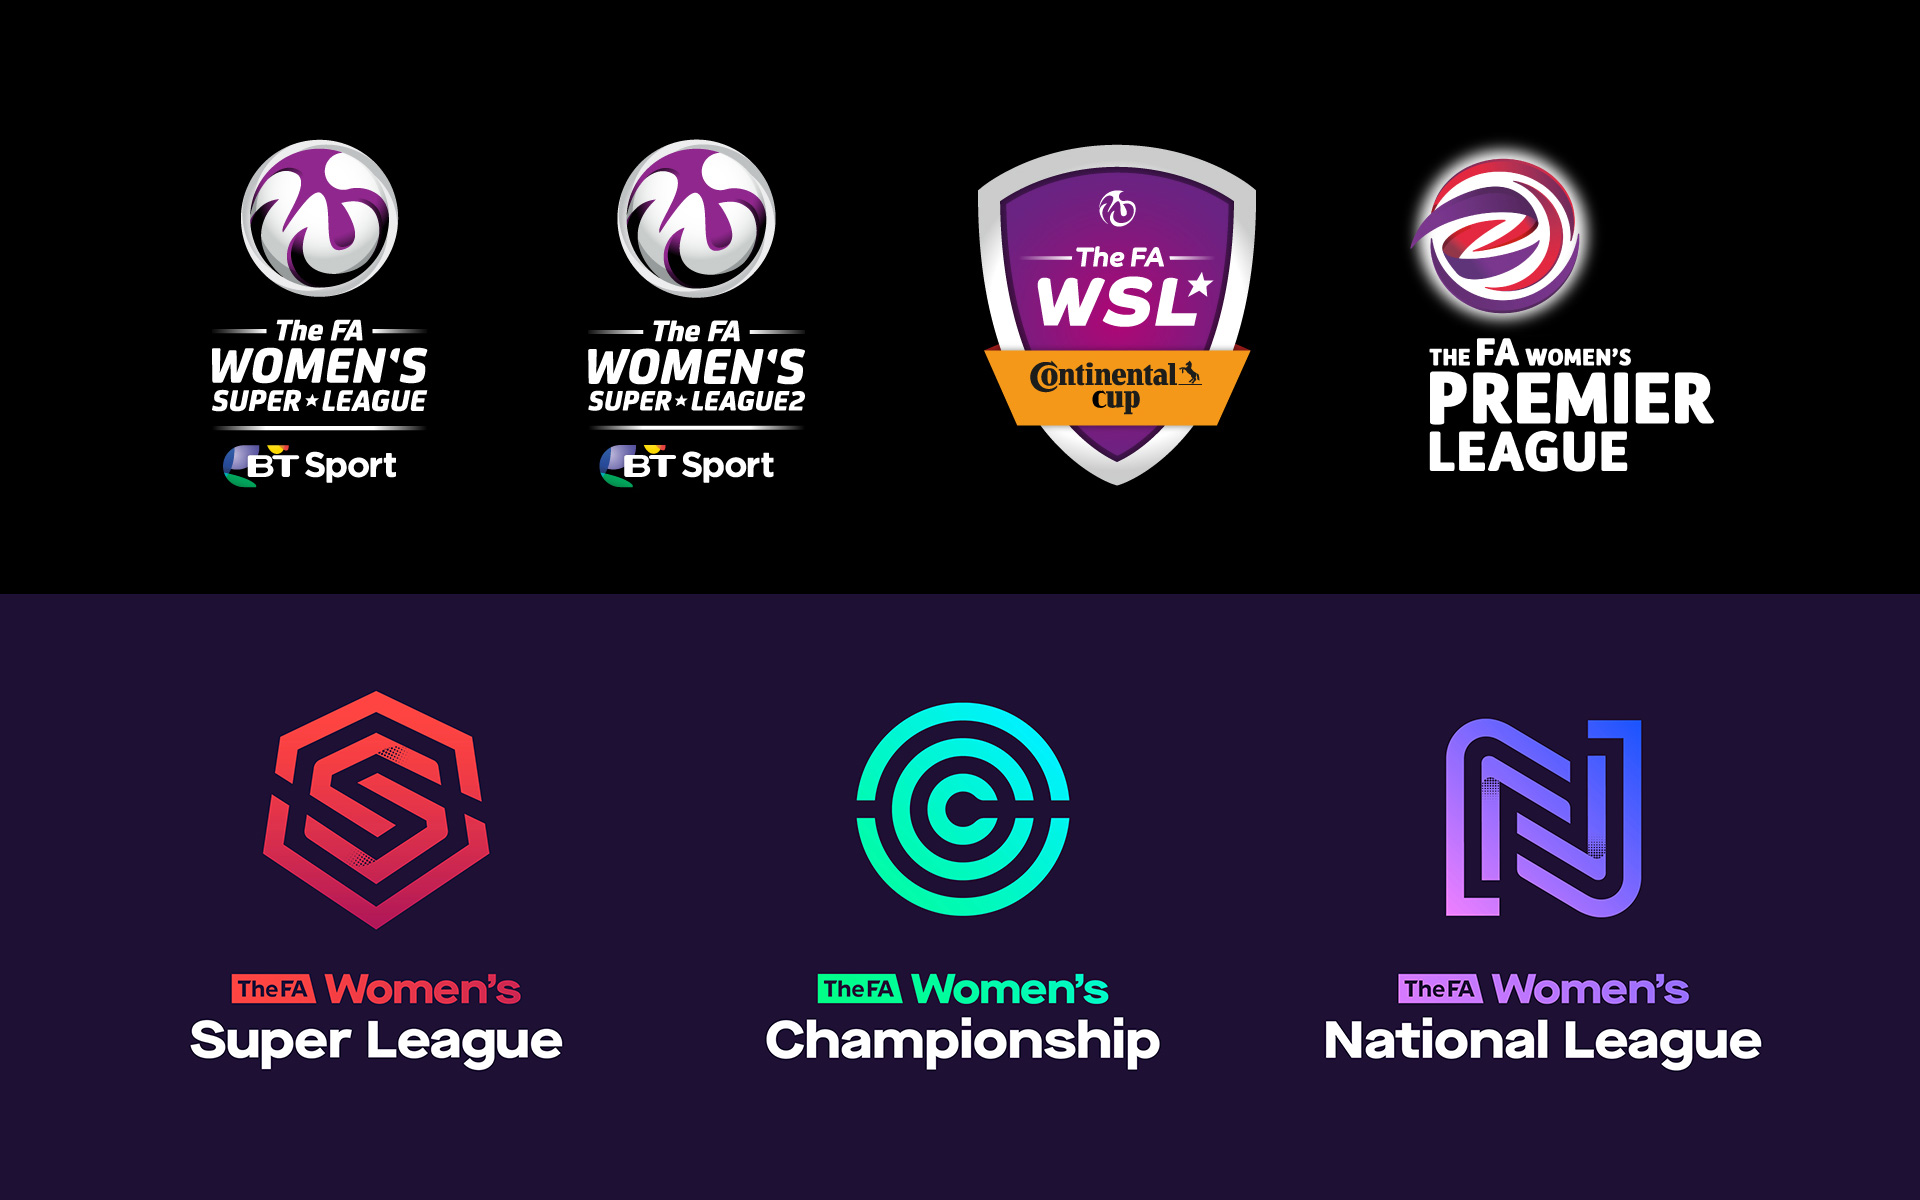 New Logos and Identity for FA Women's Leagues by Nomad